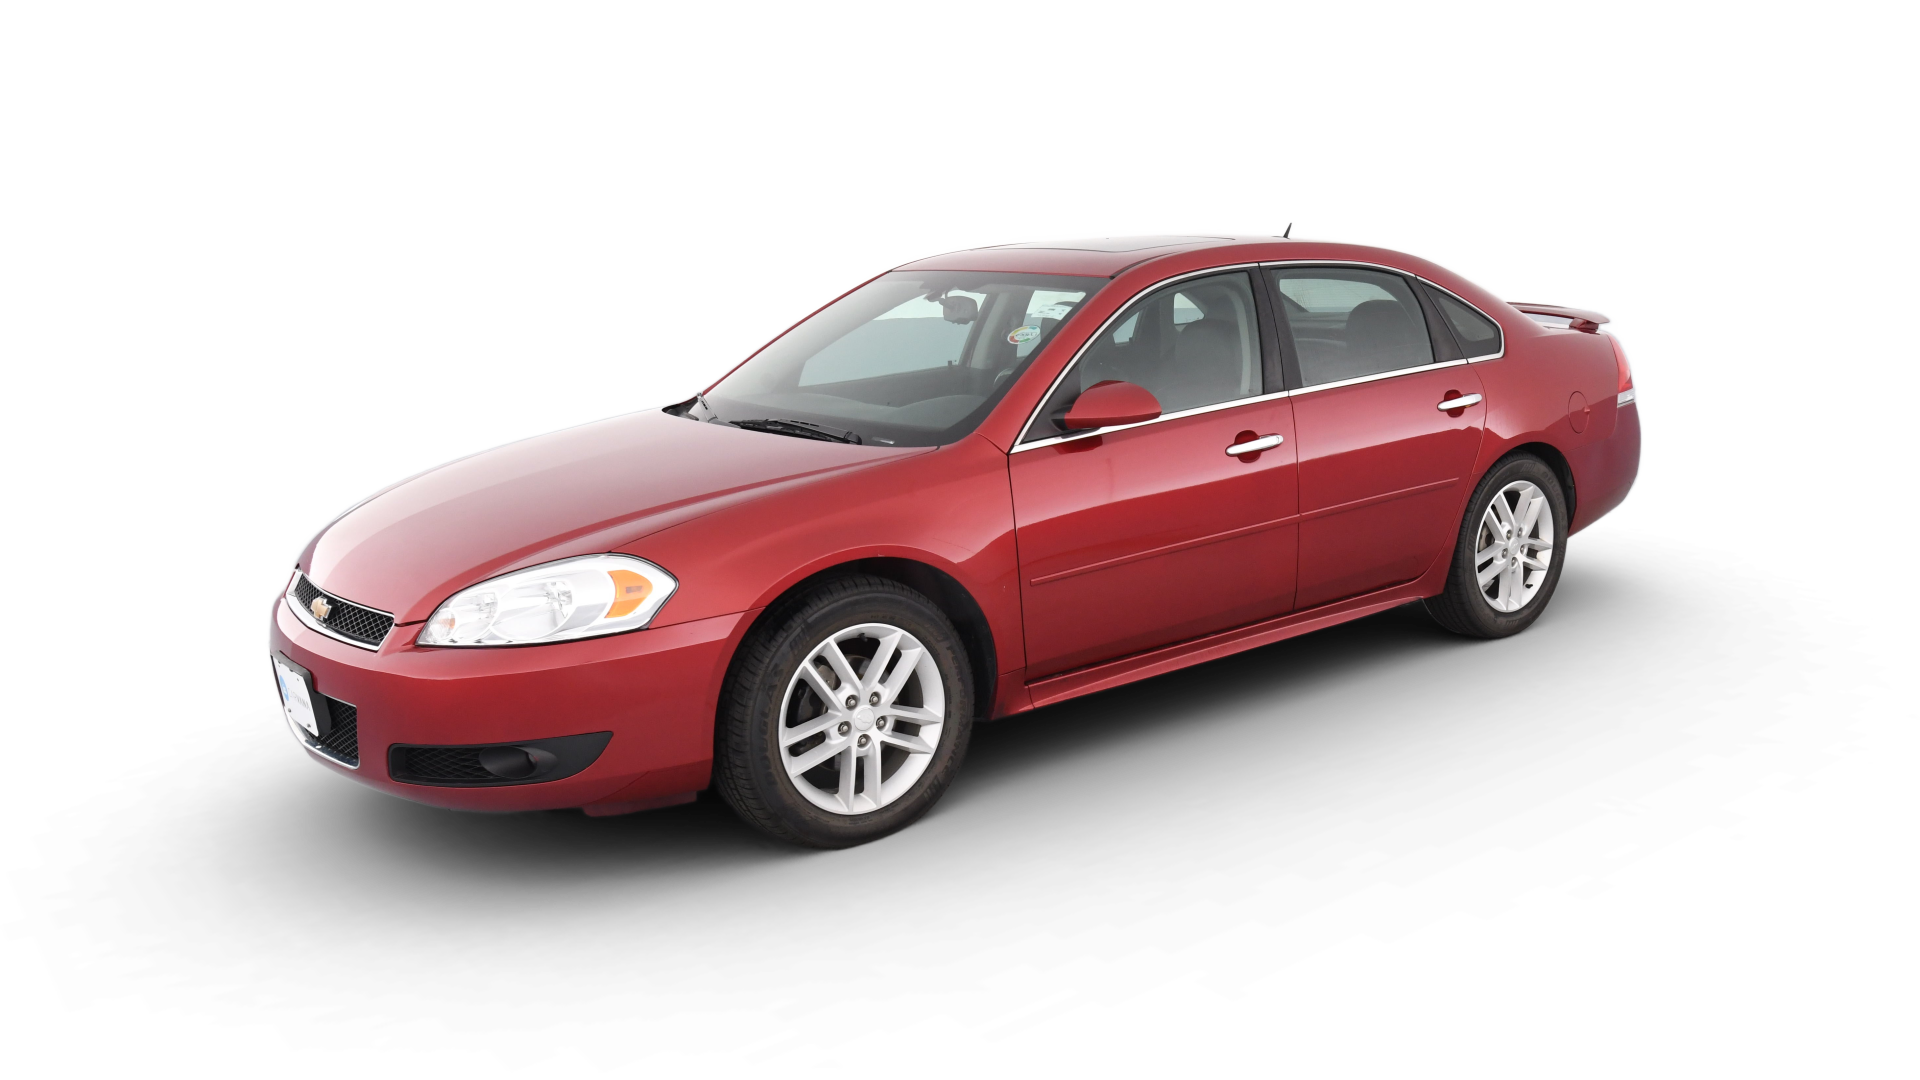 Used 2013 Chevrolet Impala For Sale Online | Carvana